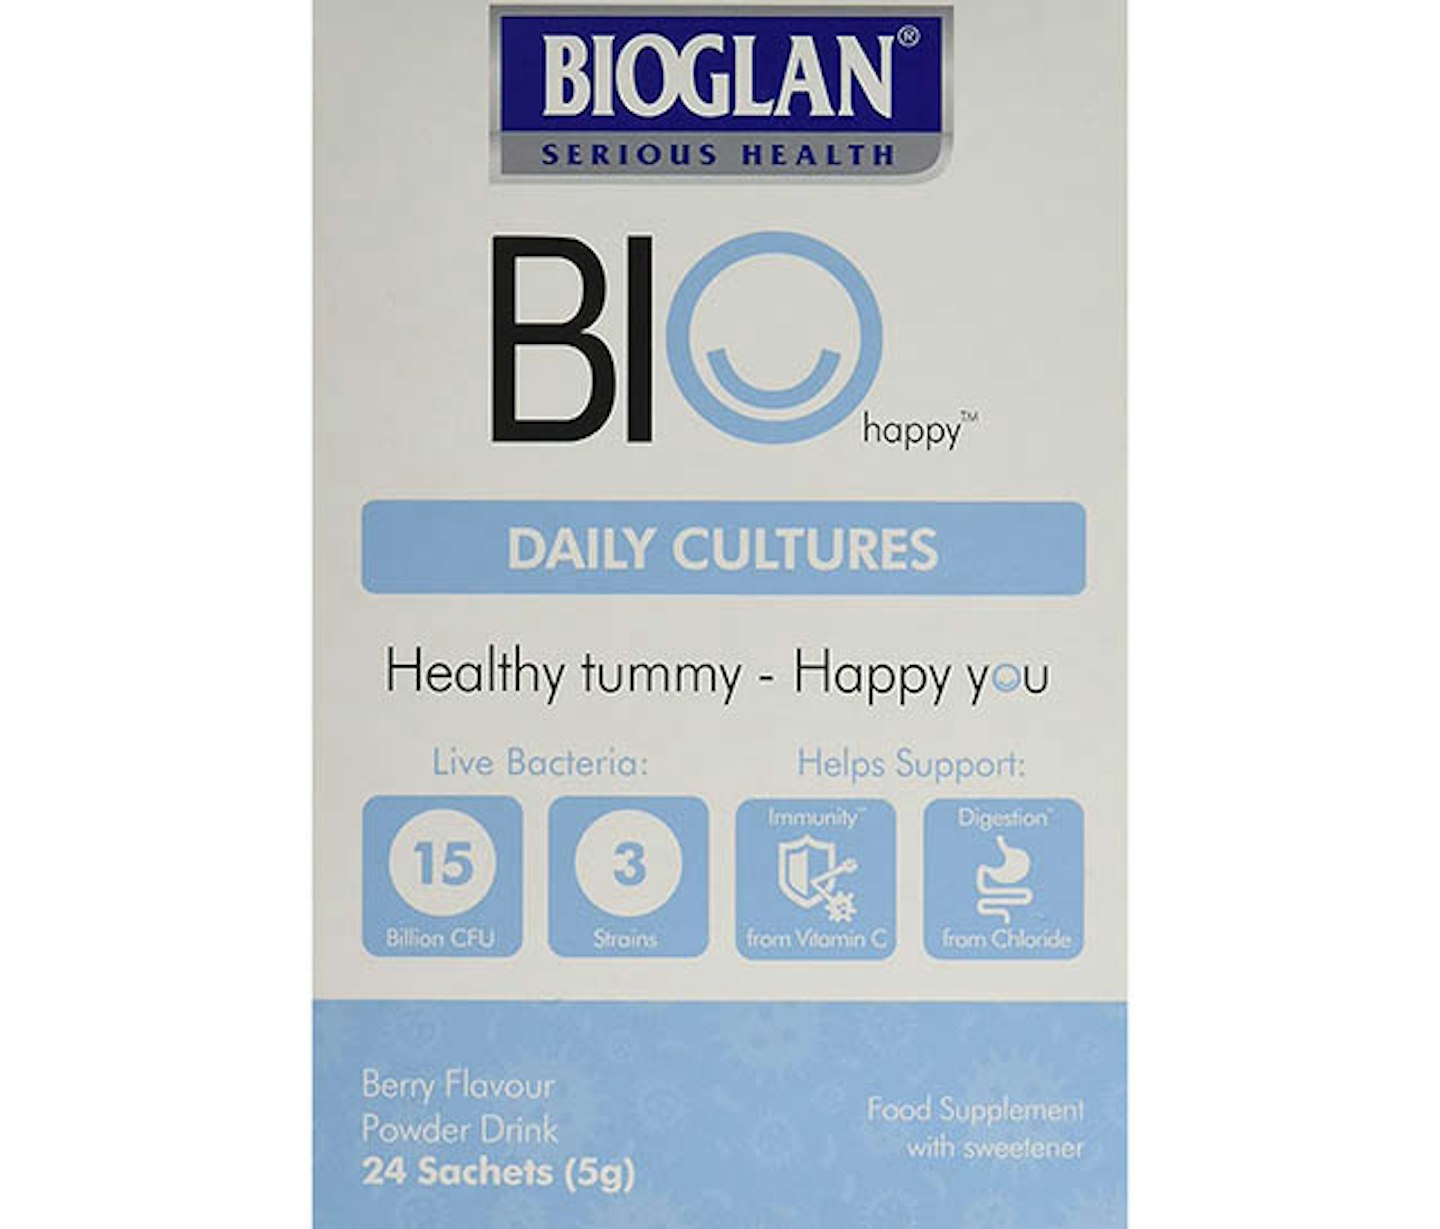 At breakfast, try topping up your good bacteria with a probiotic supplement such as Bioglan BioHappy Daily Cultures